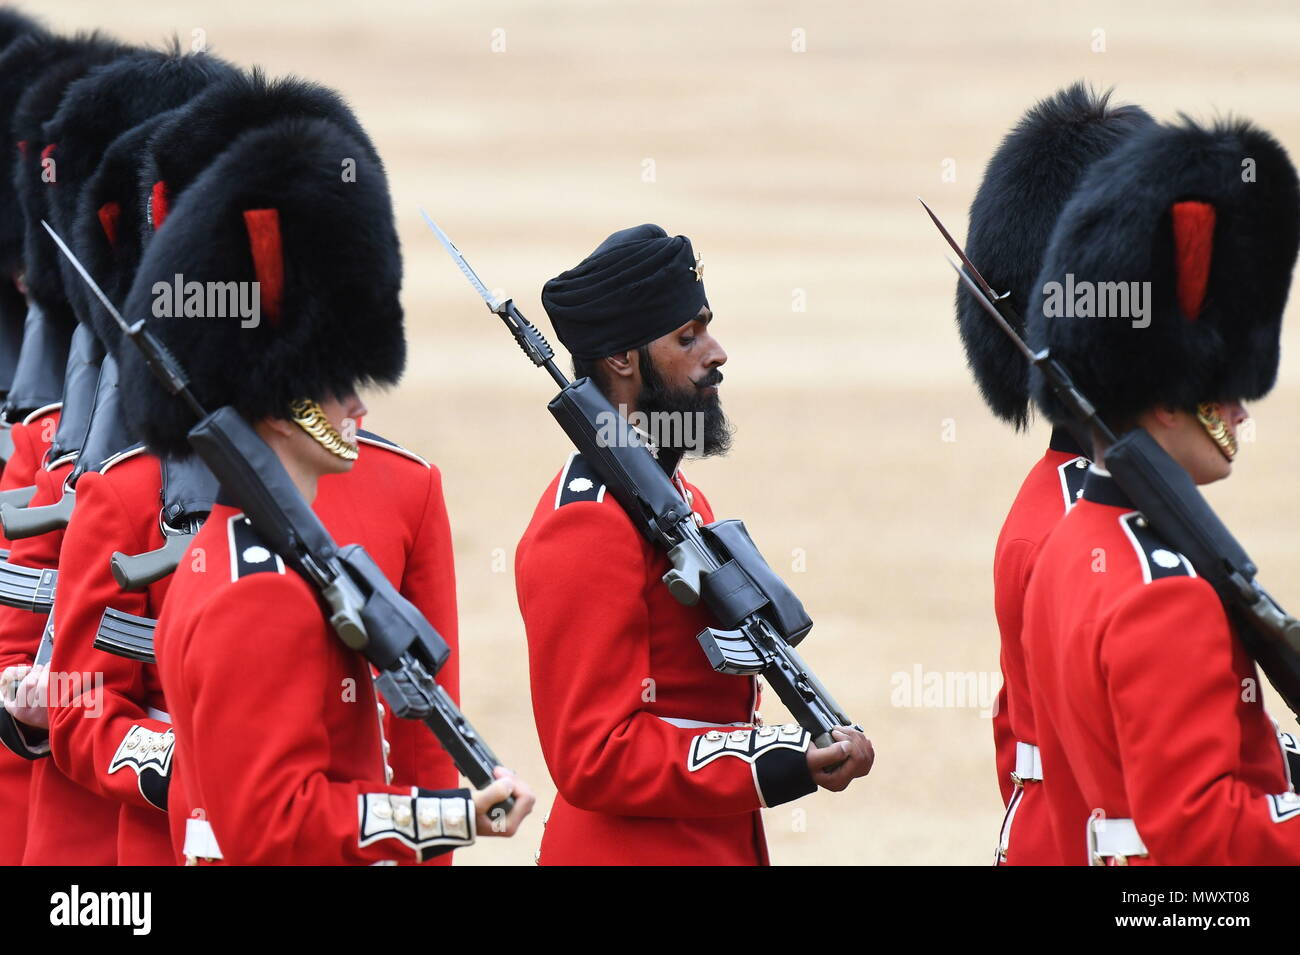 A Sikh member of the Coldstream Guards wearing a turban as he takes part in the Colonel's Review, the final rehearsal for Trooping the Colour, the Queen's annual birthday parade, in Central London. Stock Photo